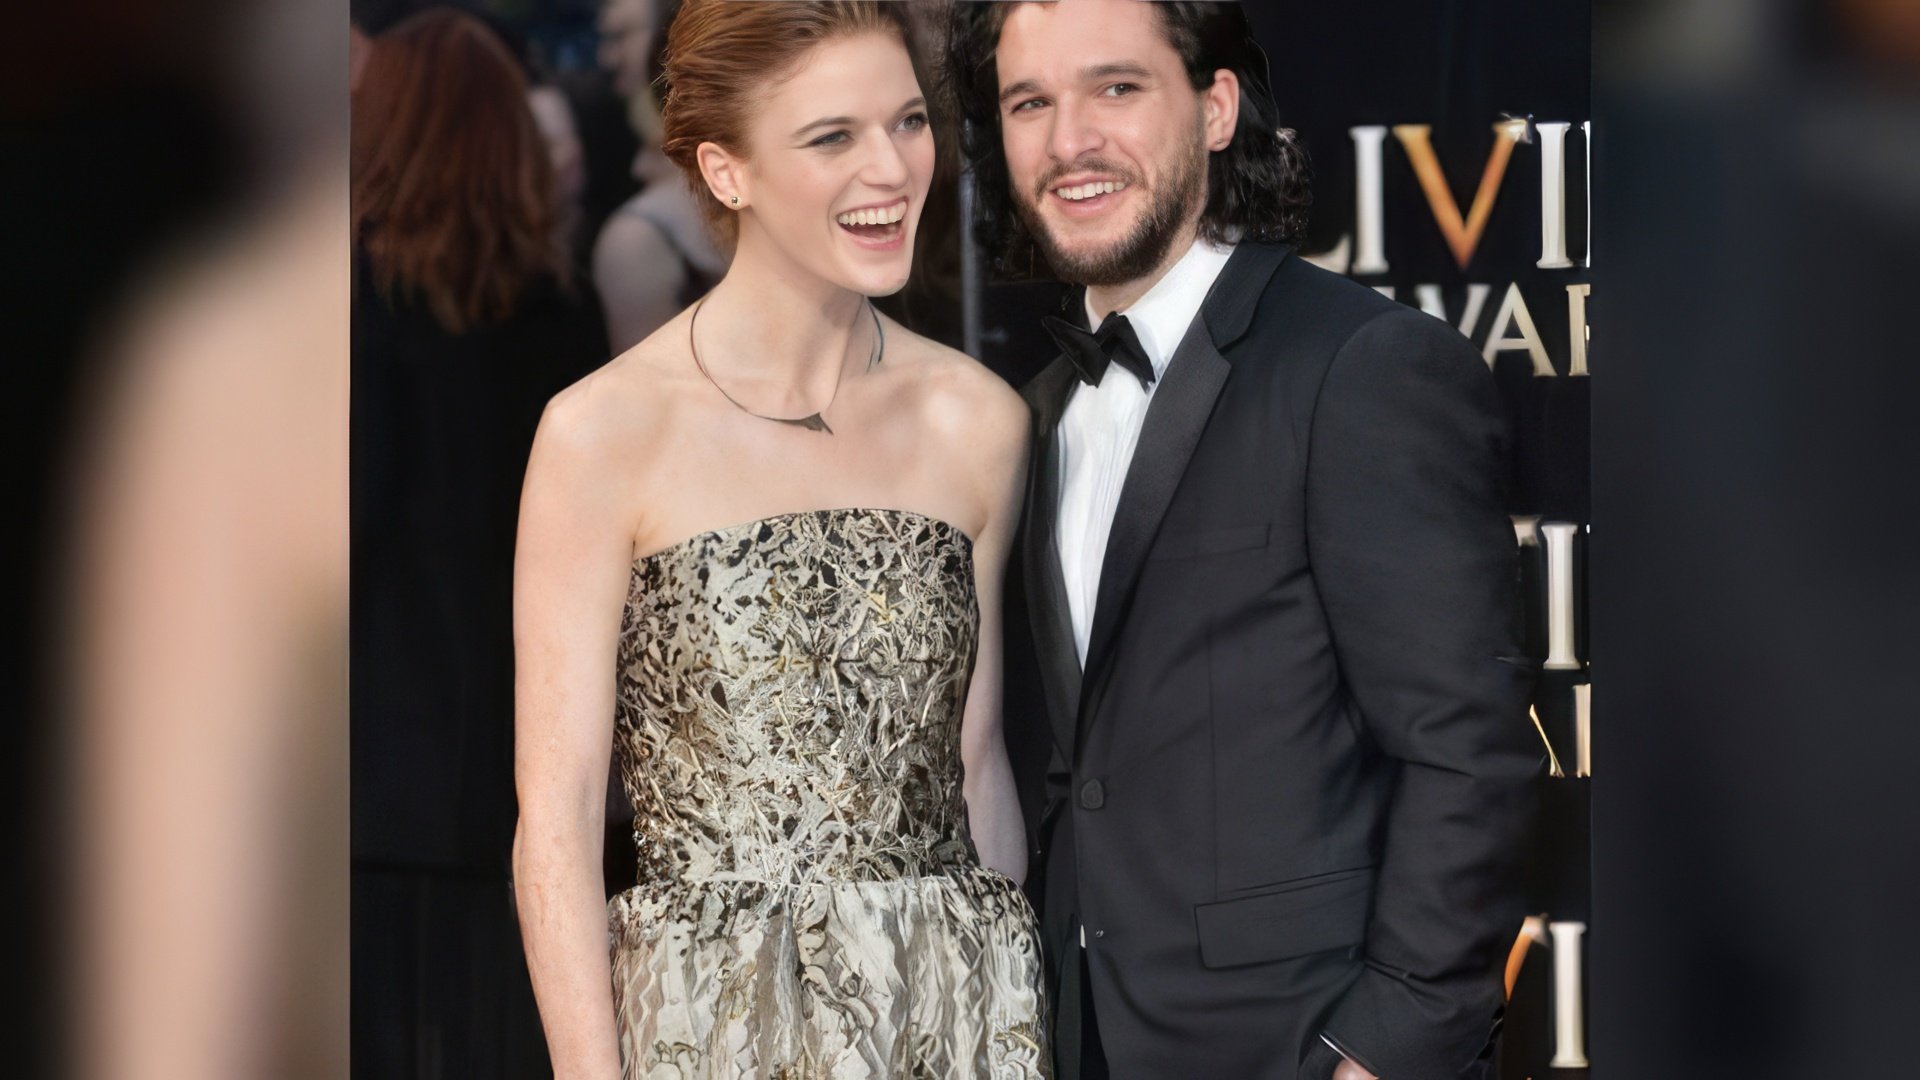 In April 2016, Rose Leslie and Kit Harington announced themselves as a couple